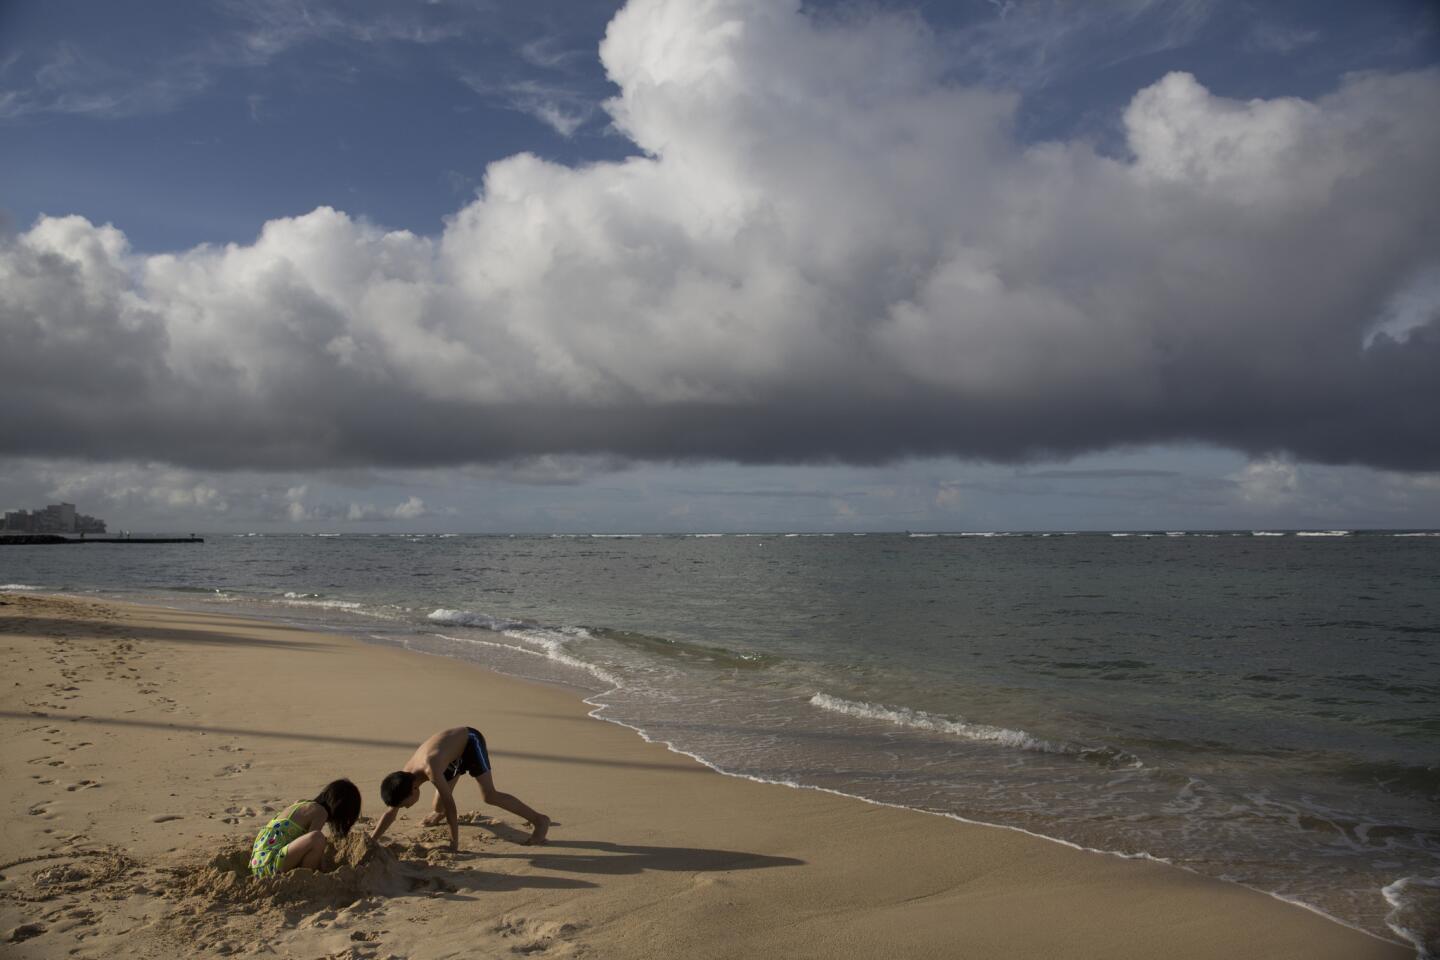 Two children visiting from China play on Waikiki Beach in Honolulu. Most of the famed beach fronting Waikiki was closed after heavy rains triggered a half-million gallon sewage spill near Hawaii's world-famous tourist district.